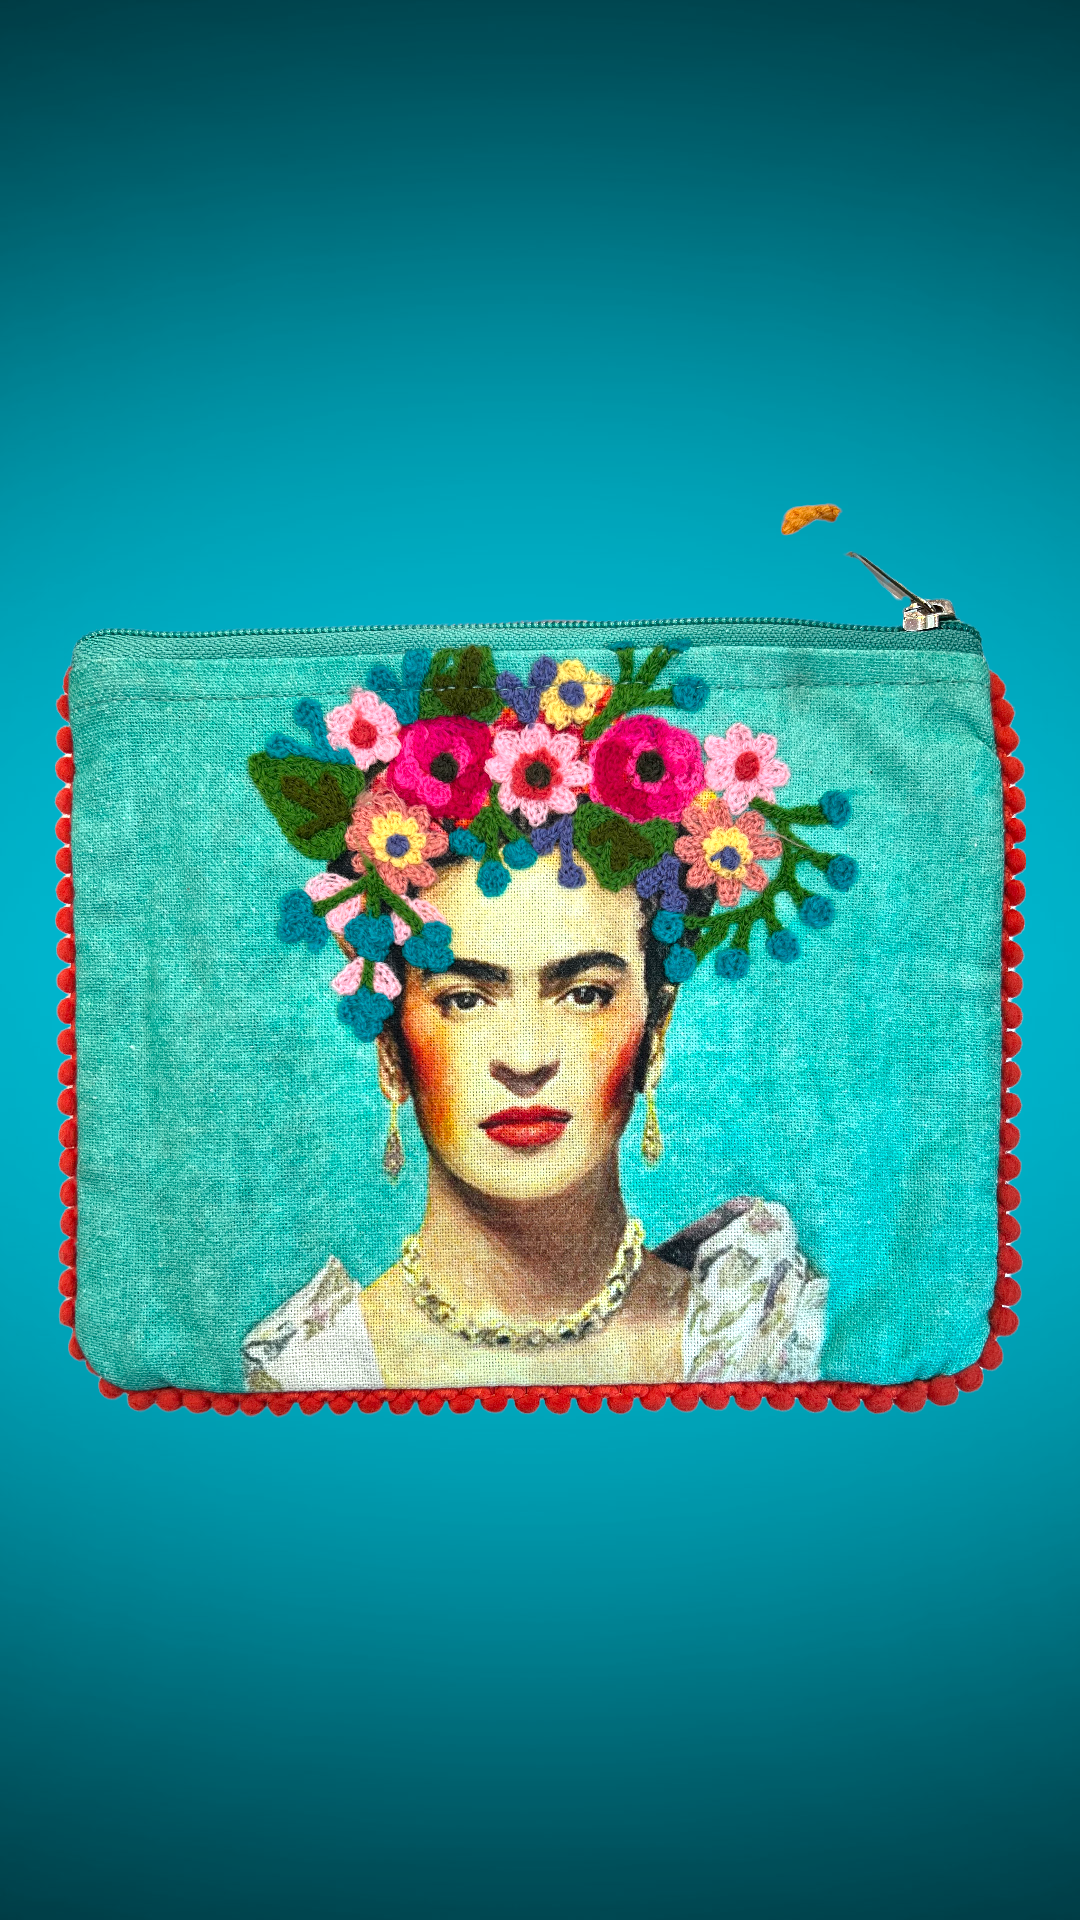 Teal purse designs embroidered with the image of Mexican artist Frida Kahlo in the center.